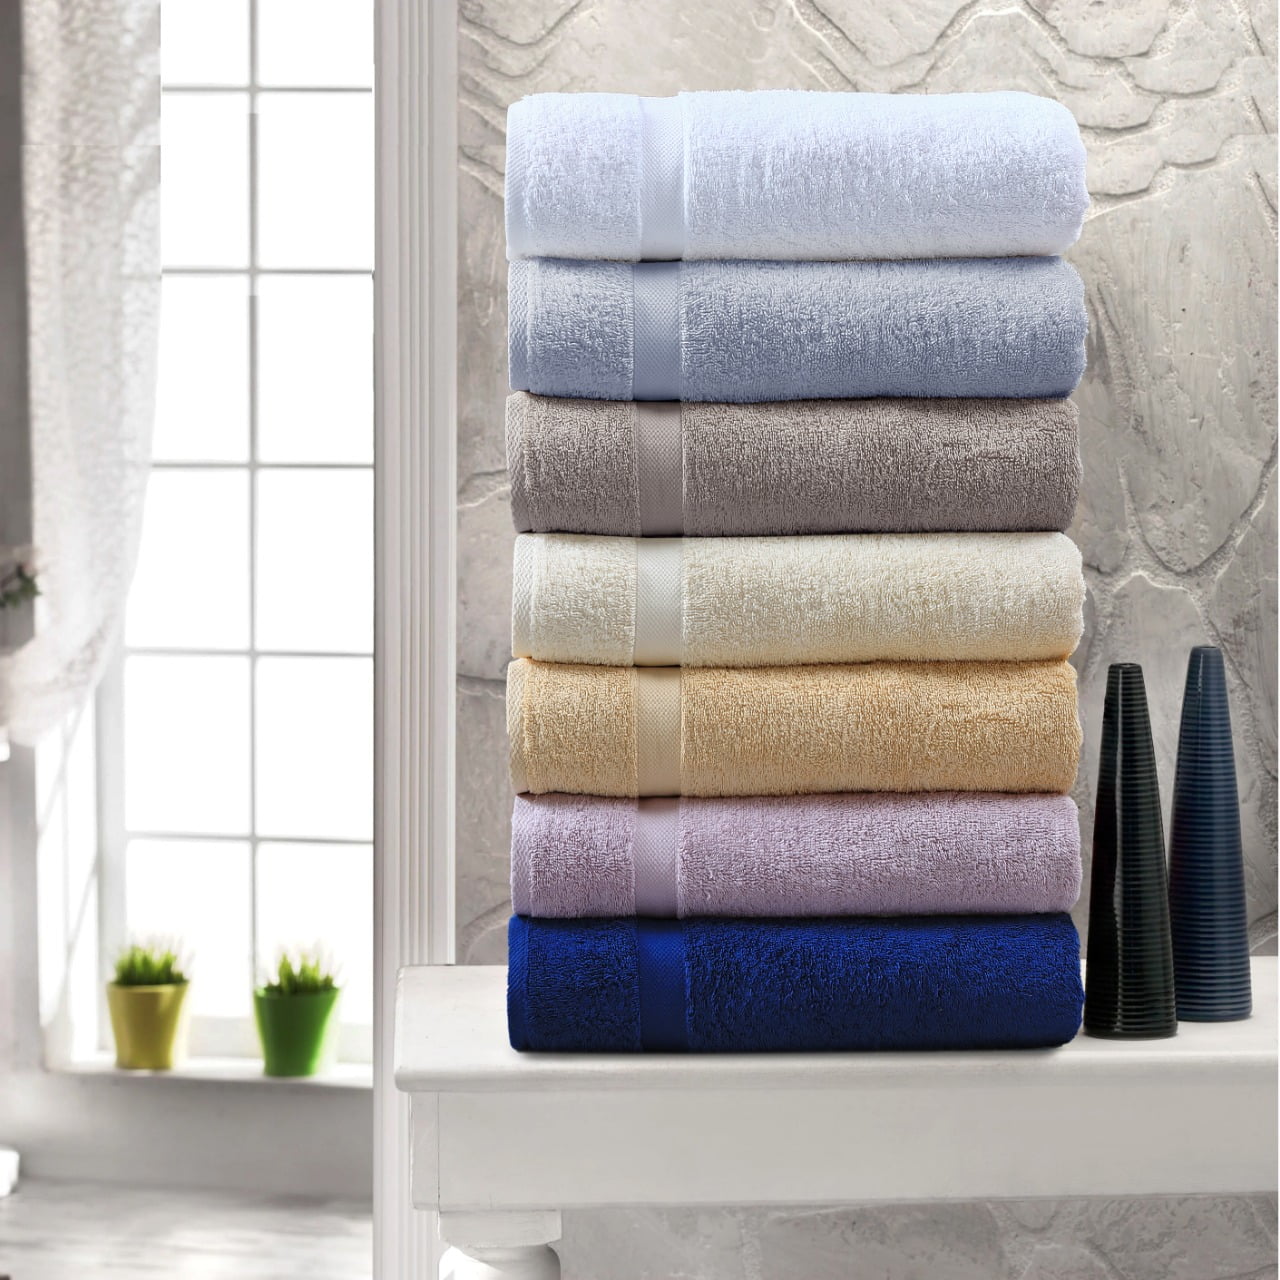  Set of 4 Luxury XL Bath Towels by Bumble - Oversized Bath Towels  Extra Large, Hotel Quality Towels, 650 GSM Soft Combed Cotton, Home Spa Bathroom  Towels, Thick & Fluffy Bath